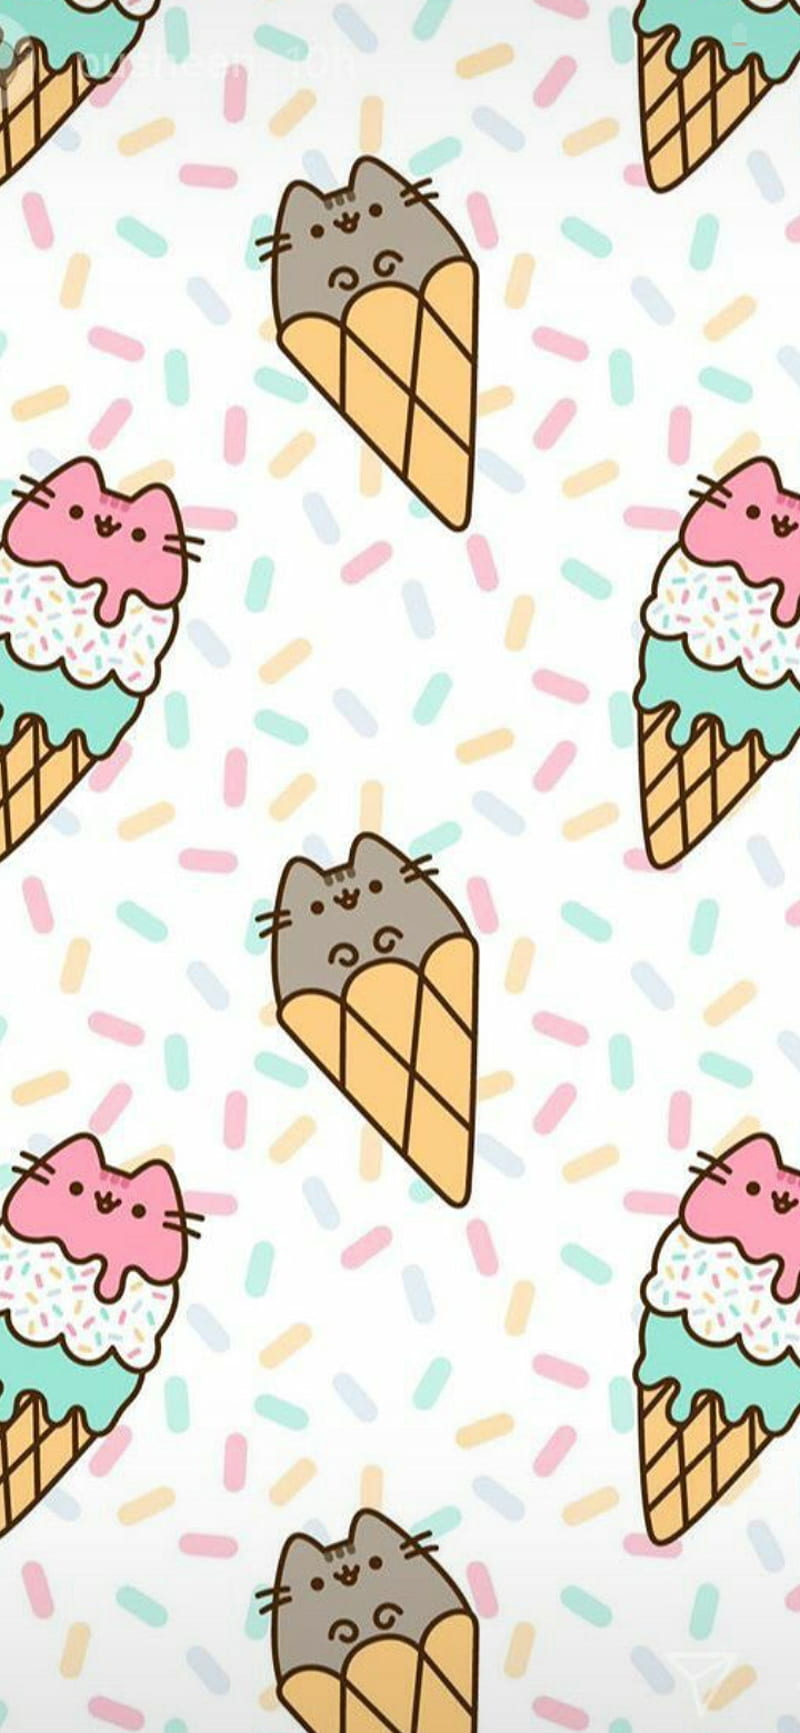 Hand Drawn Love Hello Kitty Ice Cream Flat Background Wallpaper Image For  Free Download - Pngtree